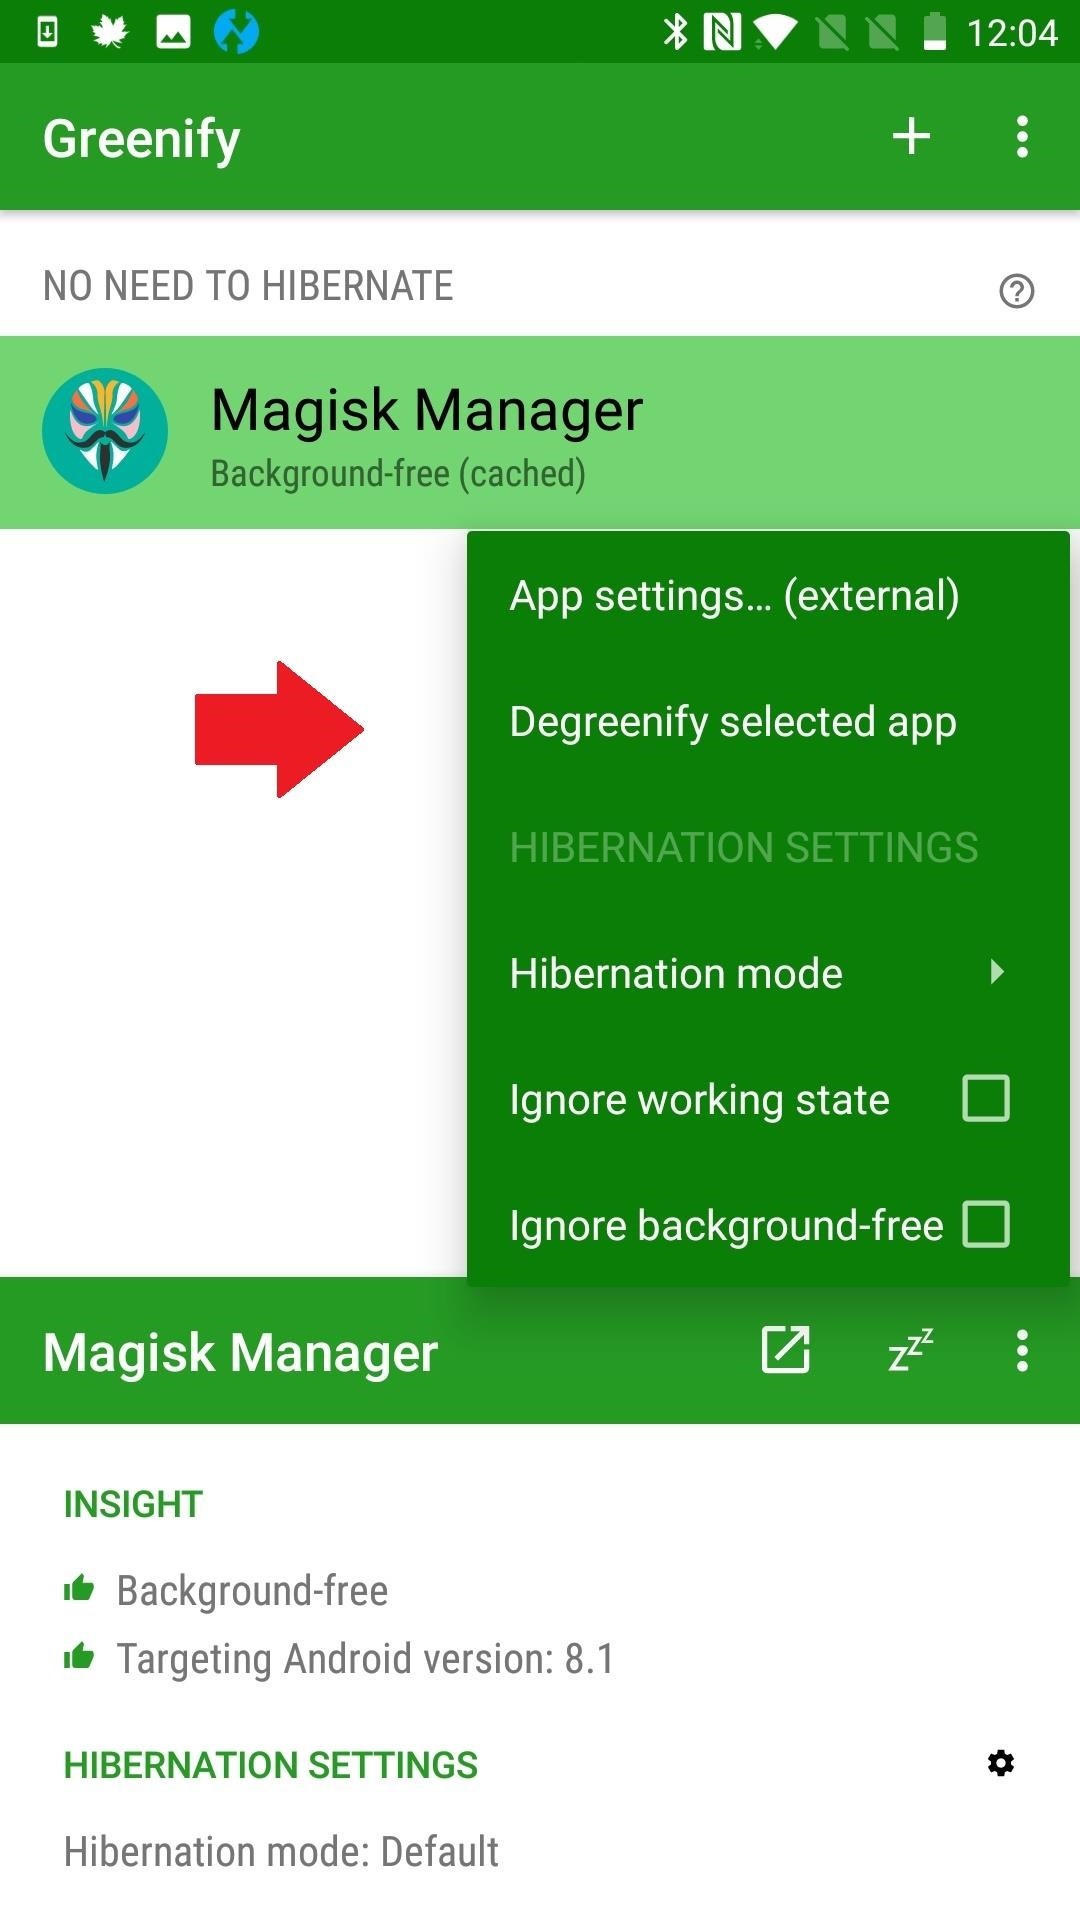 Root Apps Not Working with Magisk? Here's What to Do